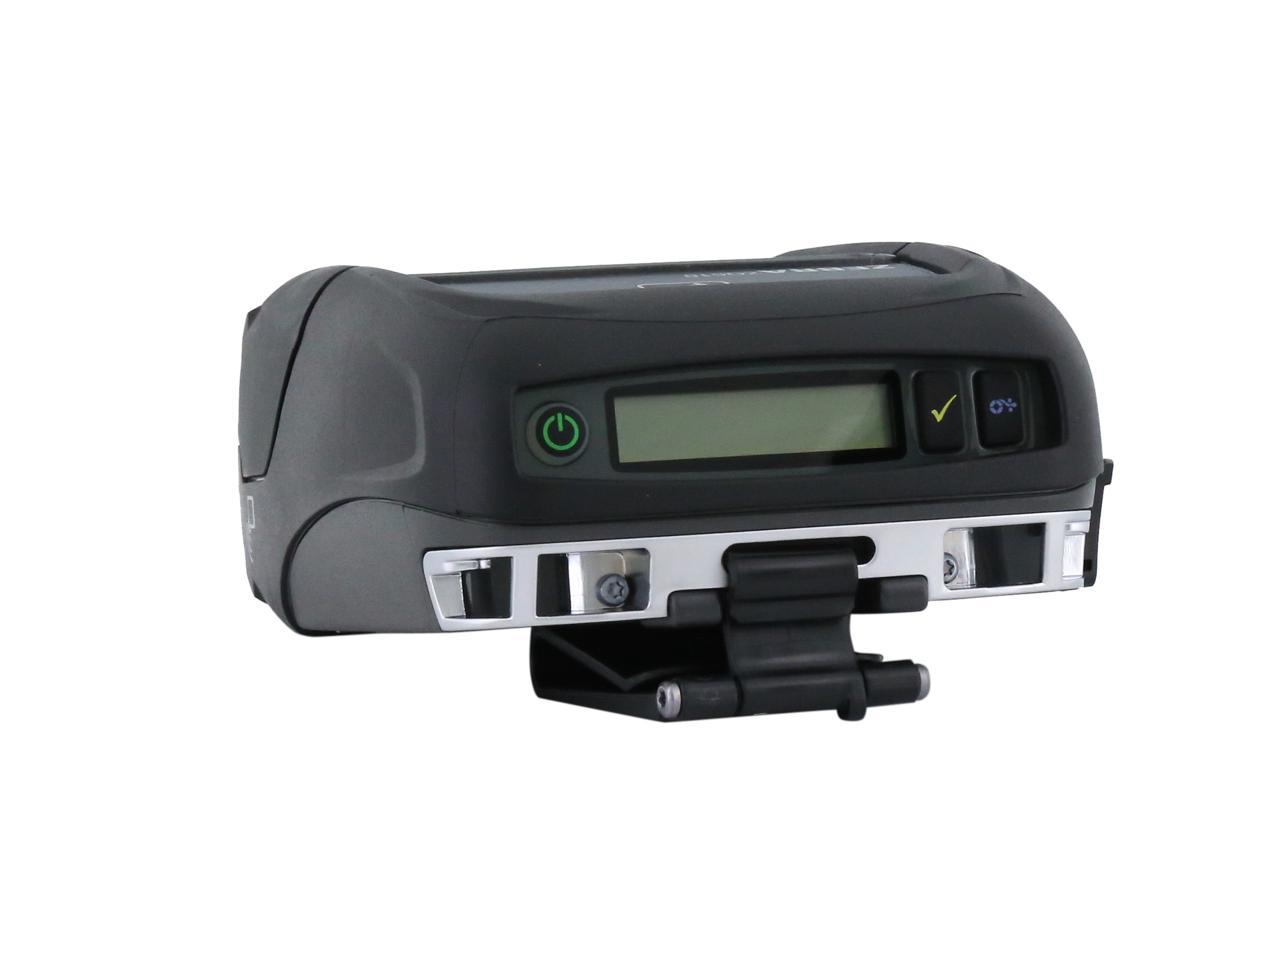 Zebra Zq510 3 Mobile Direct Thermal Receipt And Label Printer 203 Dpi Bluetooth 40 Linered 7234